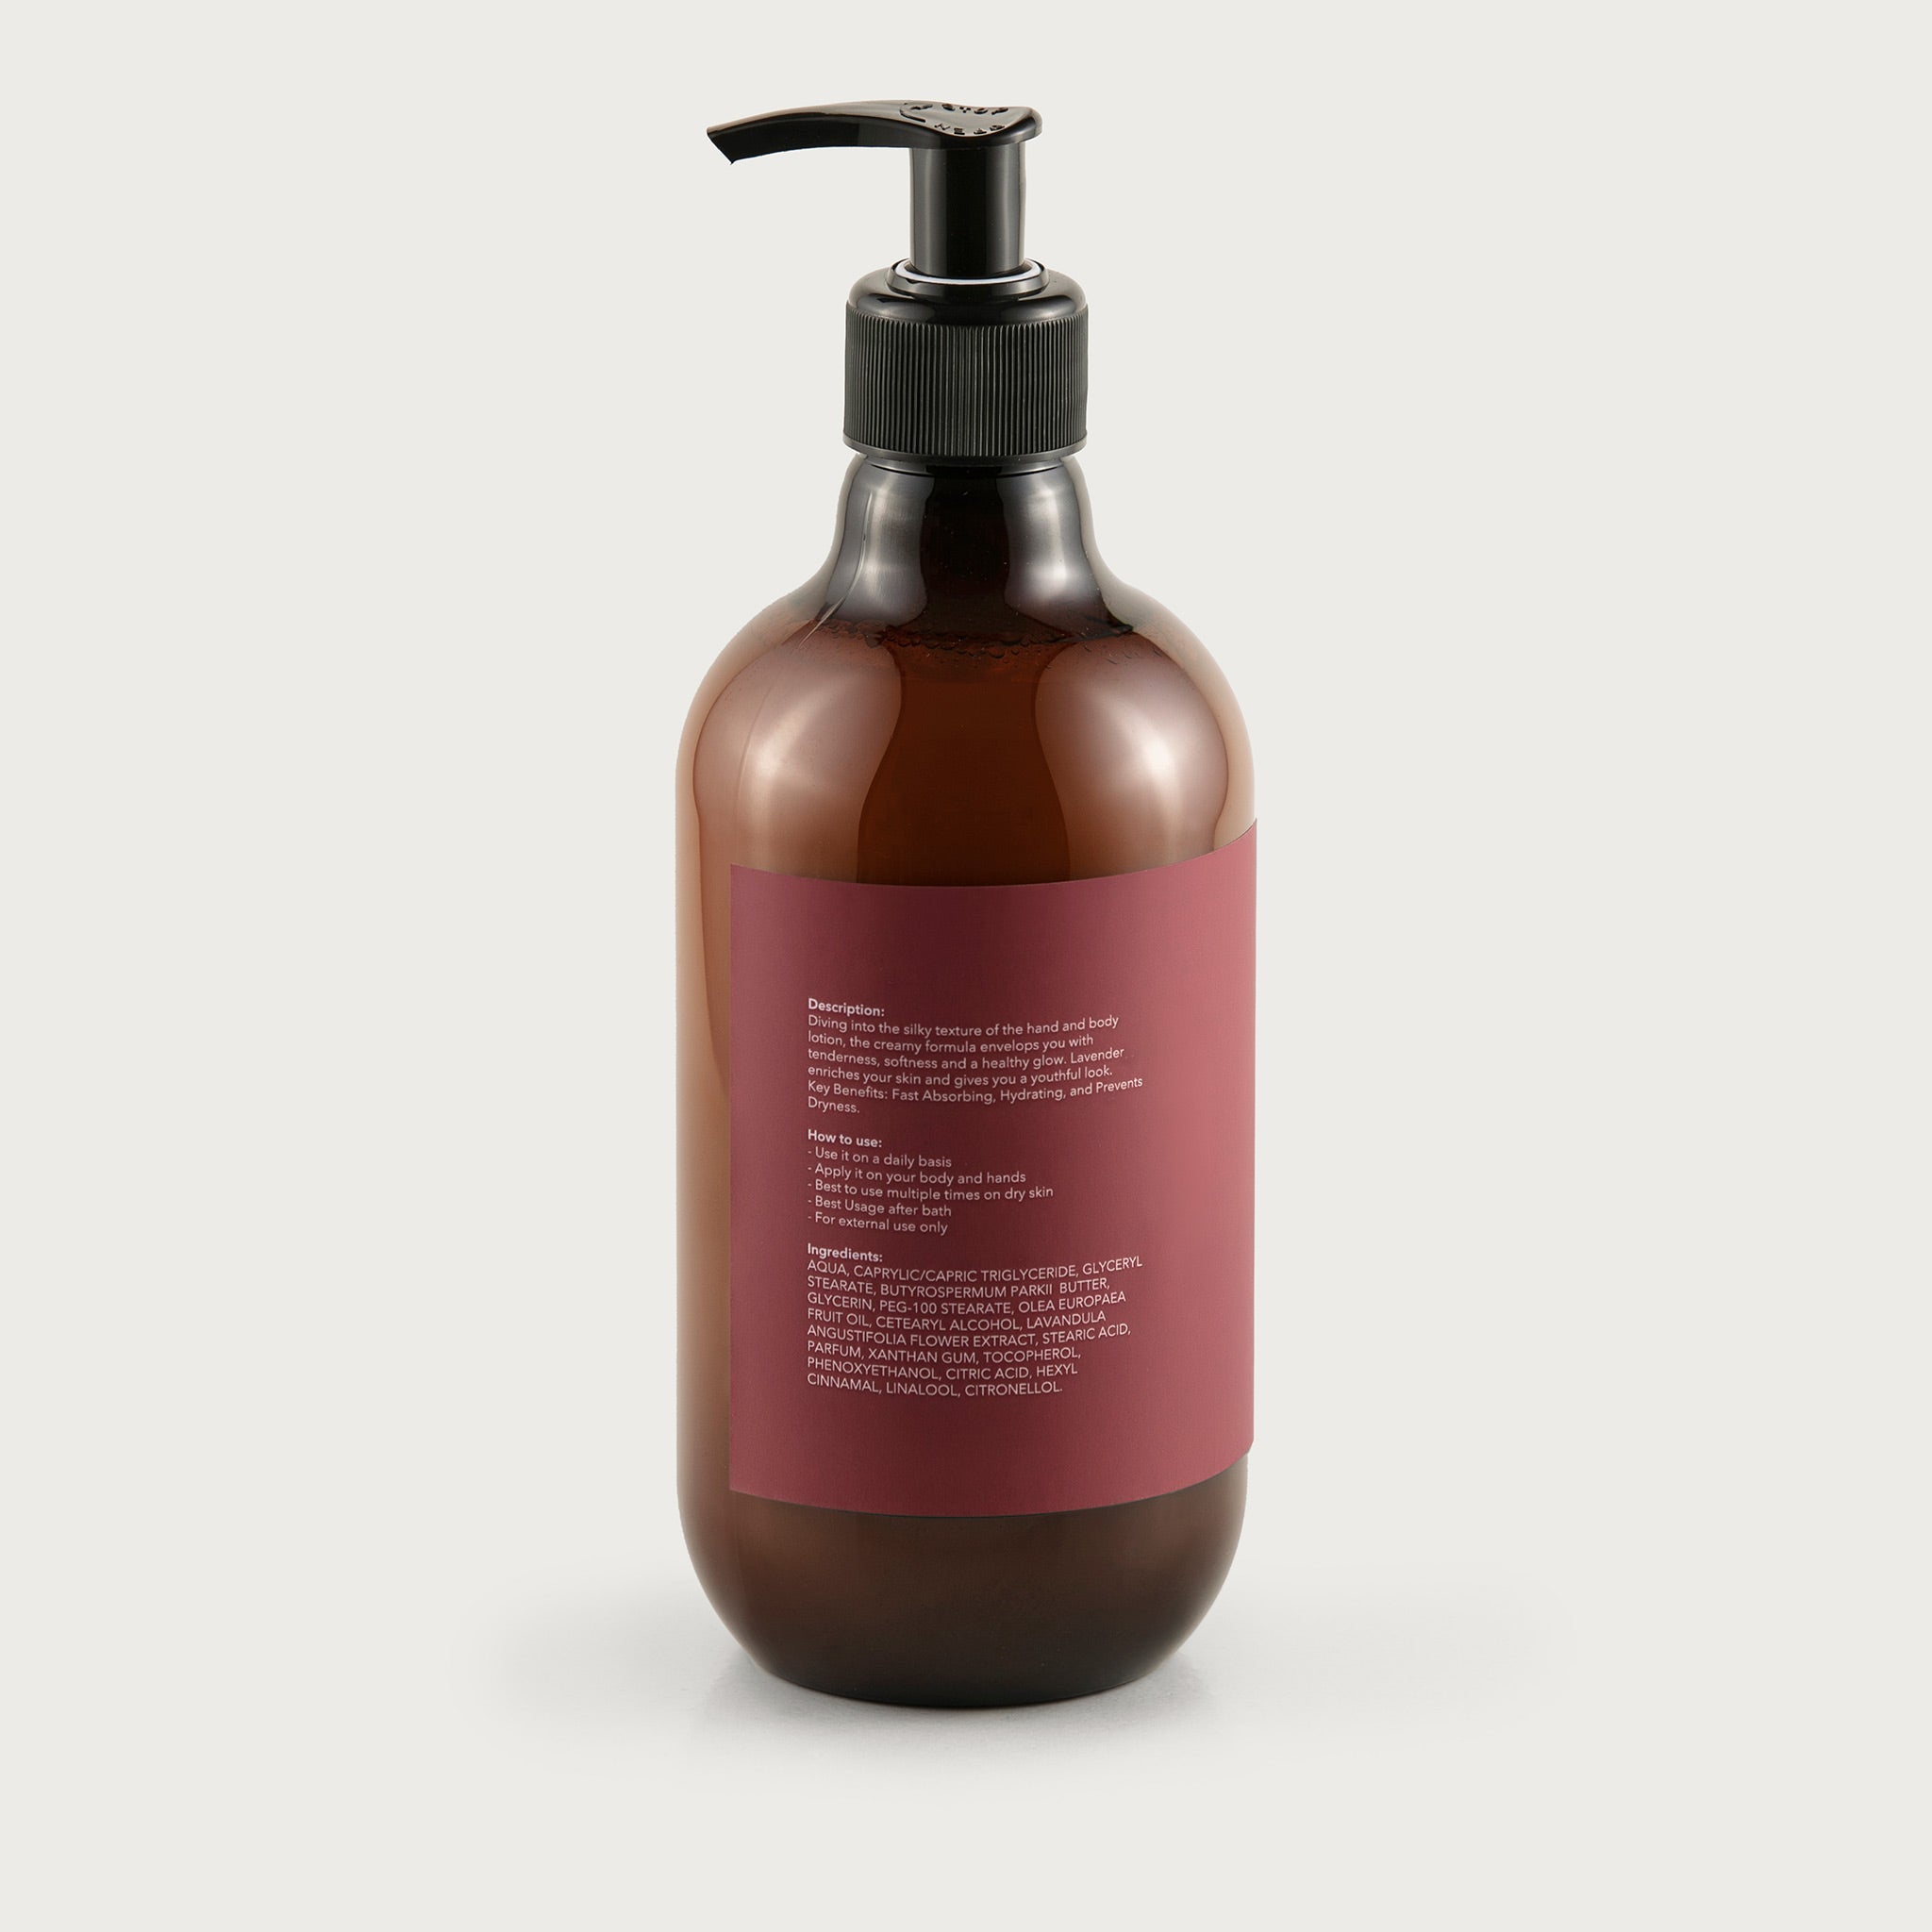 This pump top bottle is amber in color and you can see the creamy lotion inside. The label is a redish maroon color with the white Salma logo and the lavender & olive oil scent is notated.